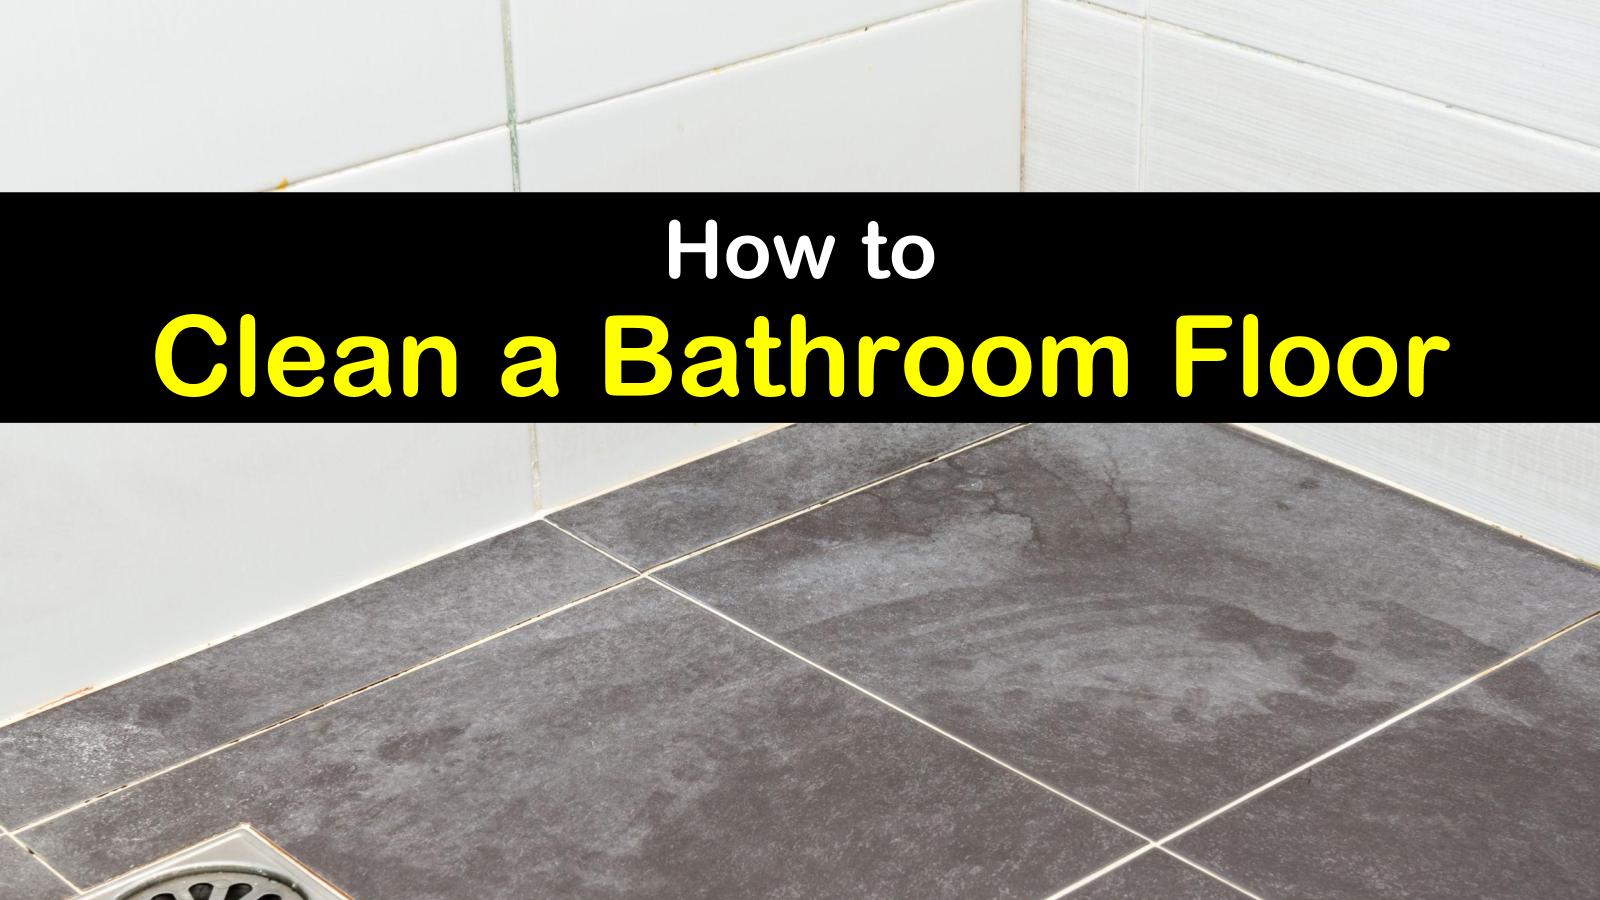 4 Simple Ways To Clean A Bathroom Floor, How To Remove Stains On Bathroom Floor